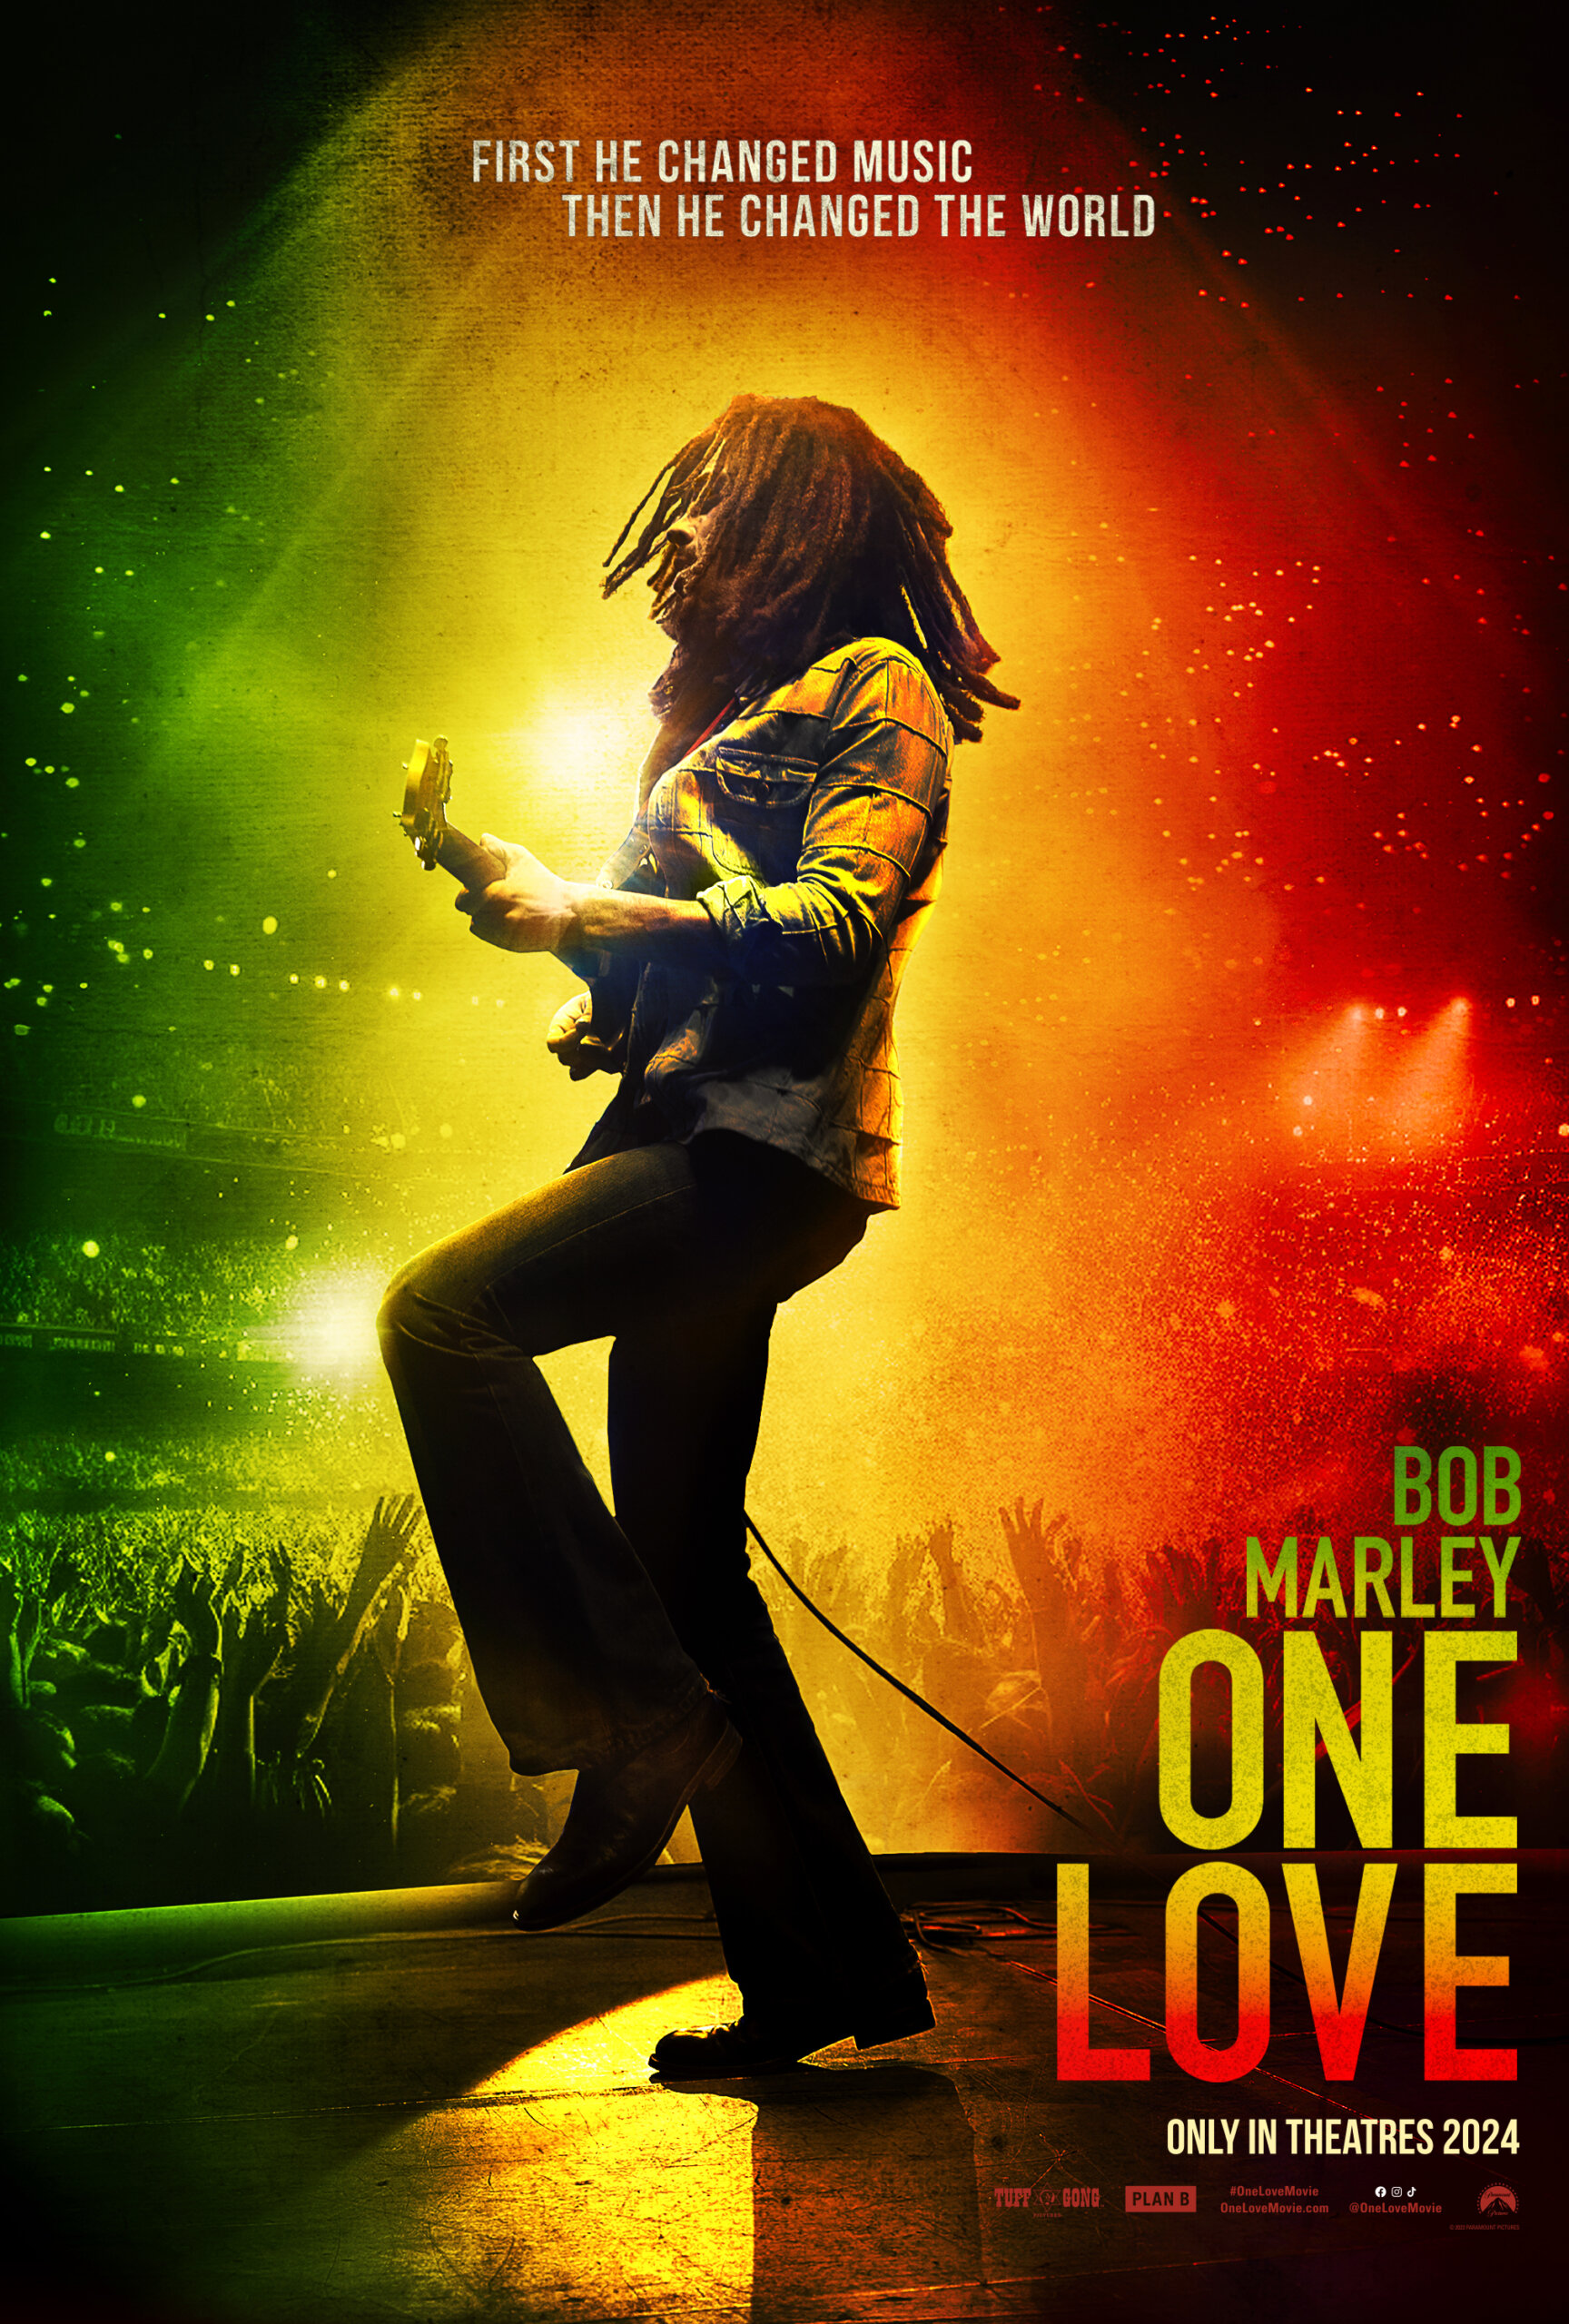 1st Trailer For 'Bob Marley: One Love' Movie